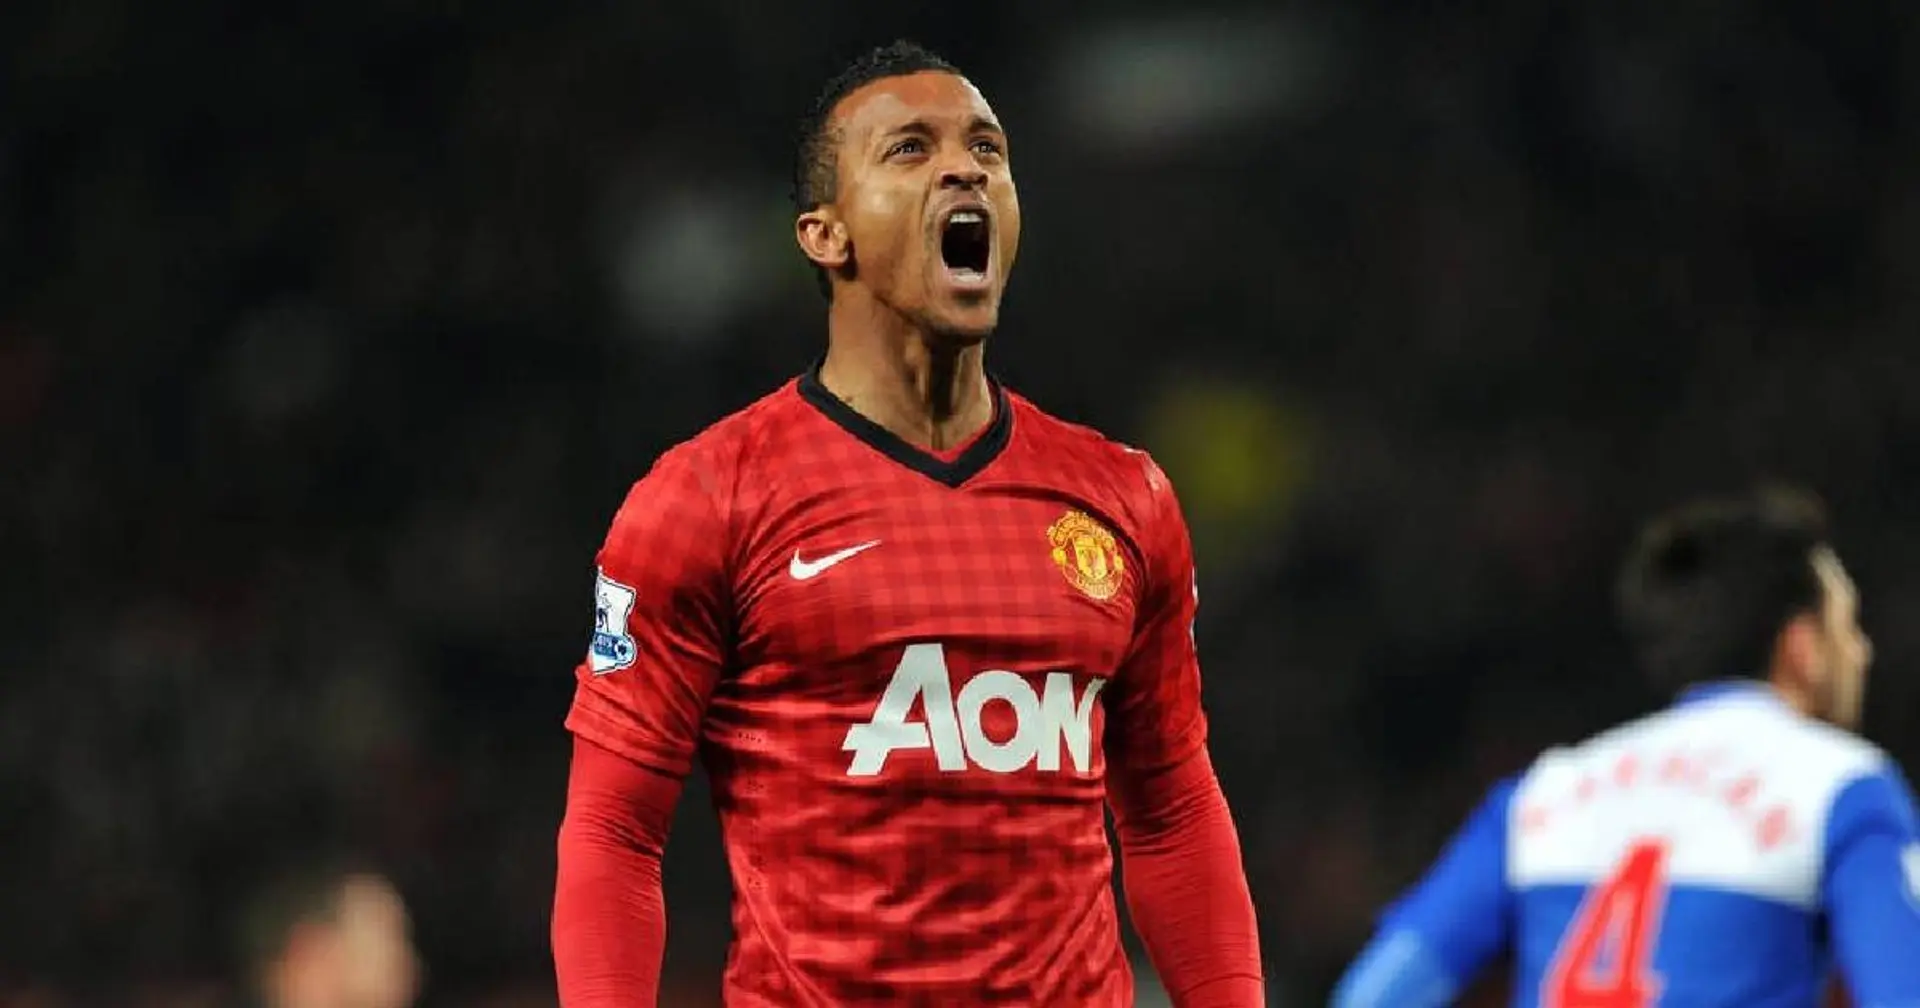 Nani reveals he signed for Man United rejecting all other clubs, including Chelsea